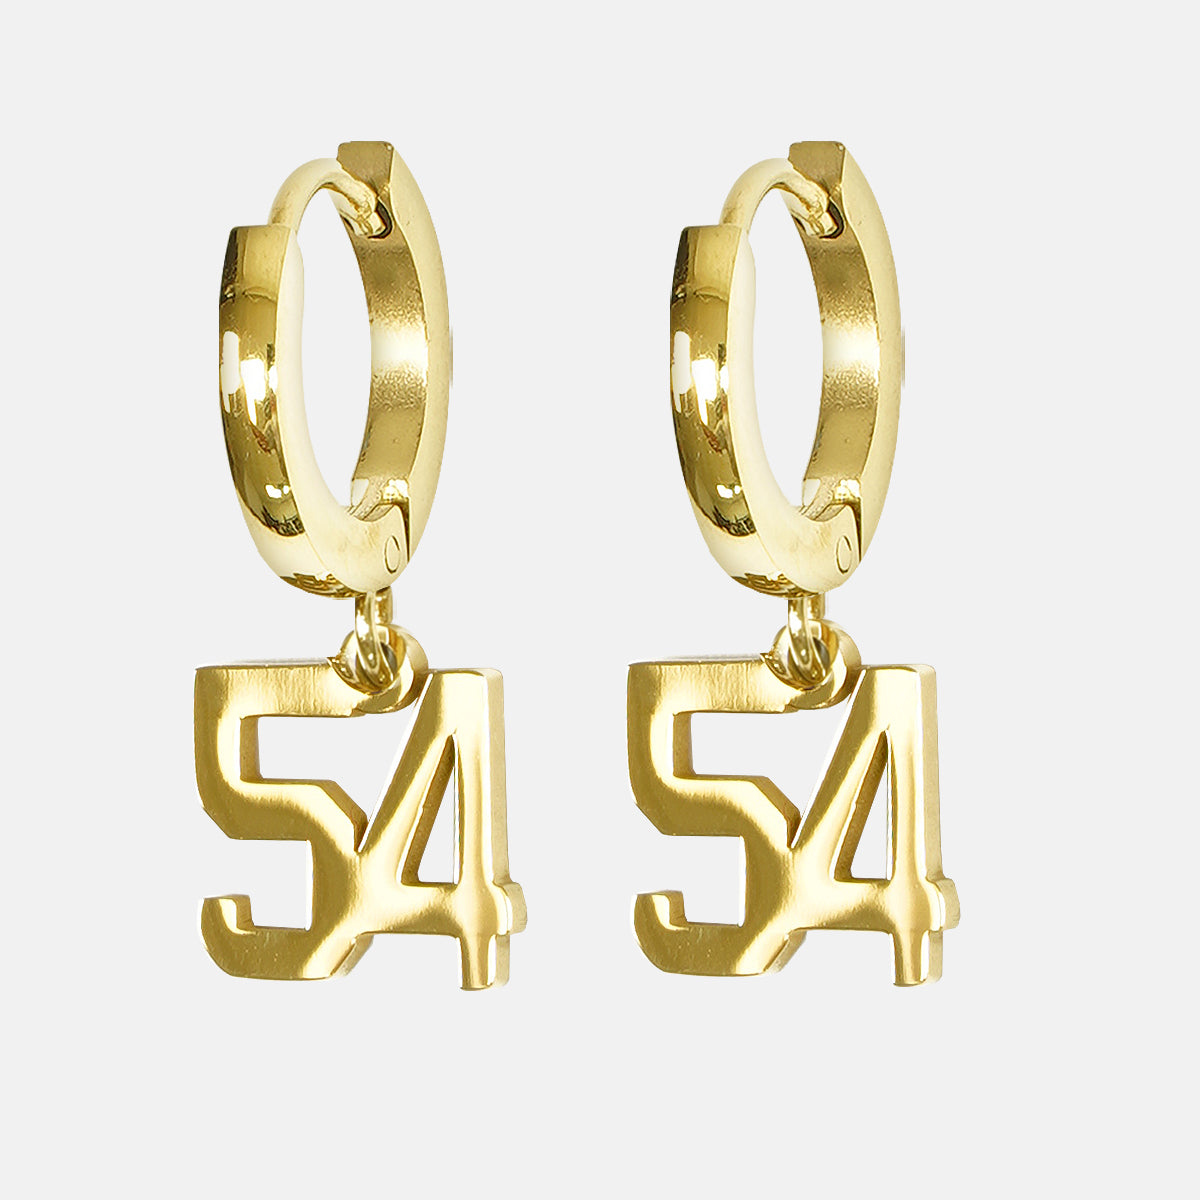 54 Number Earring - Gold Plated Stainless Steel